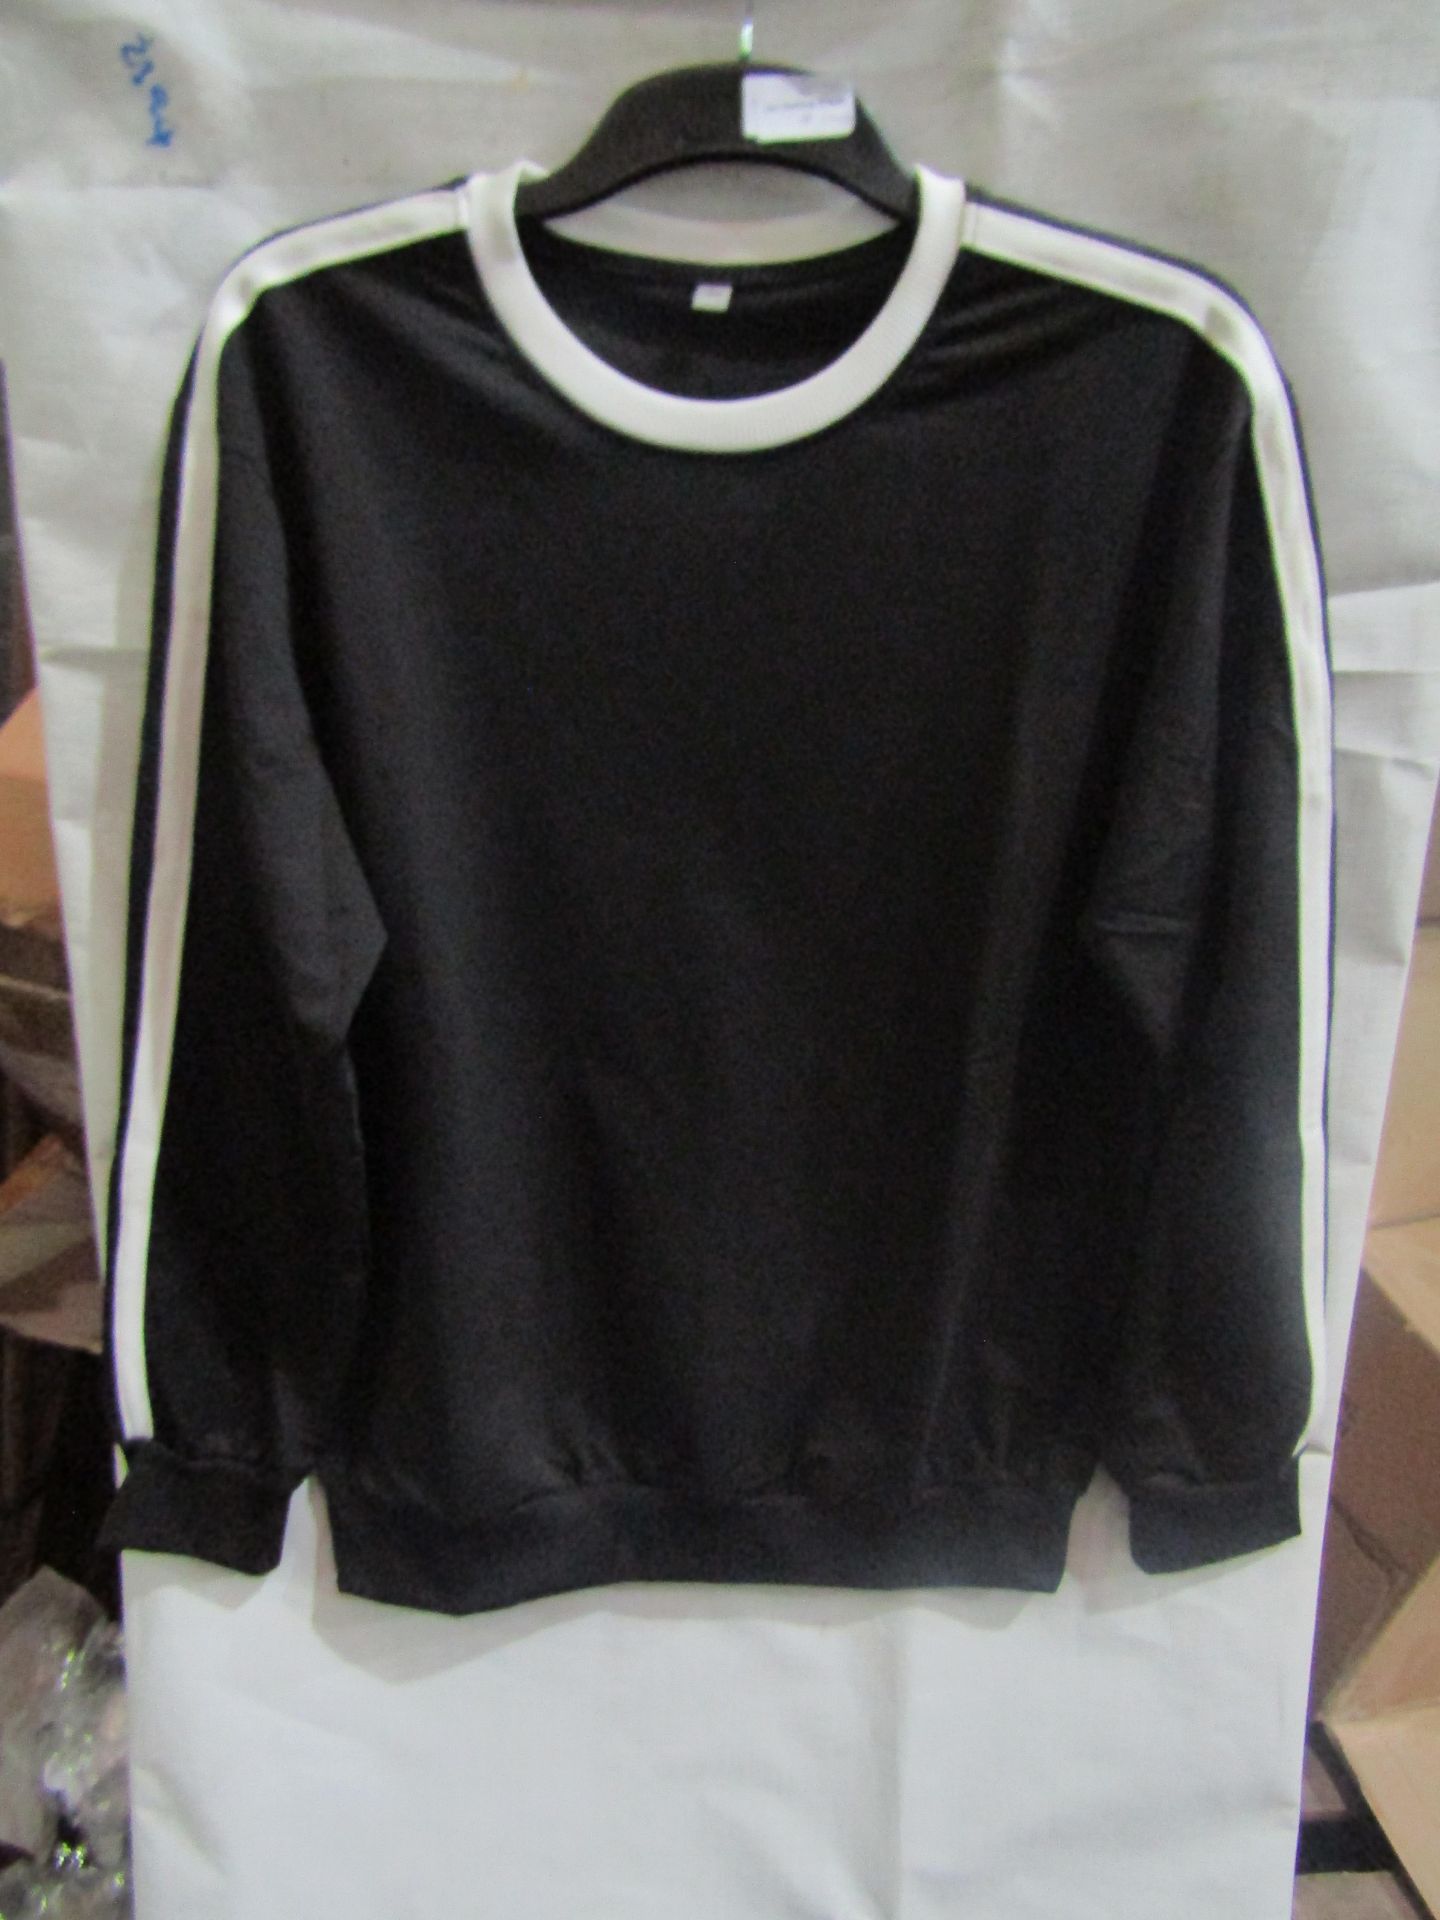 Black Jumper With White Trim, Size: L - Good Condition.